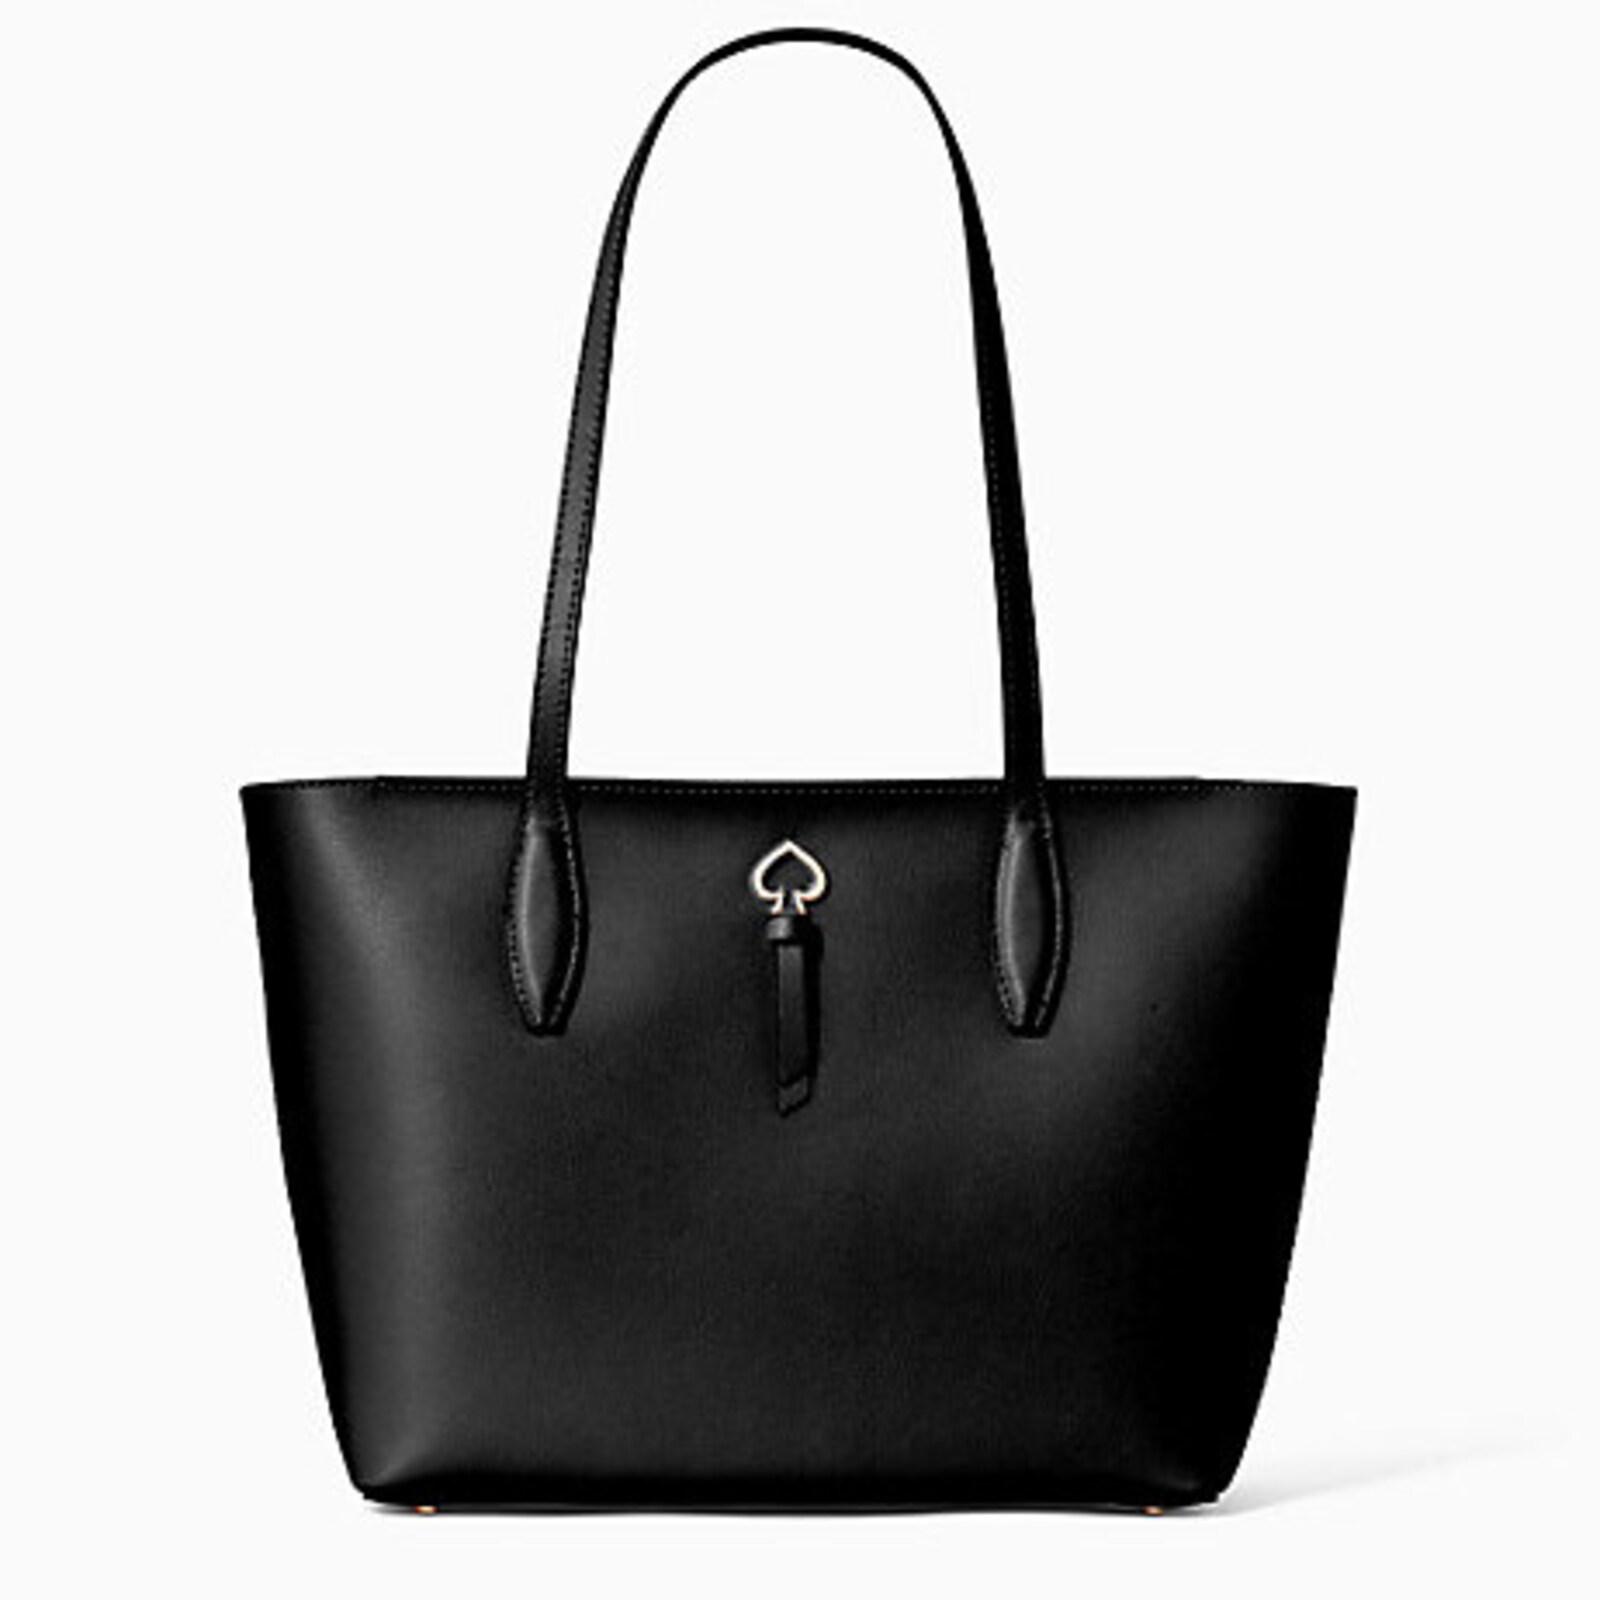 Kate Spade Adel Small Tote in Black - Lyst